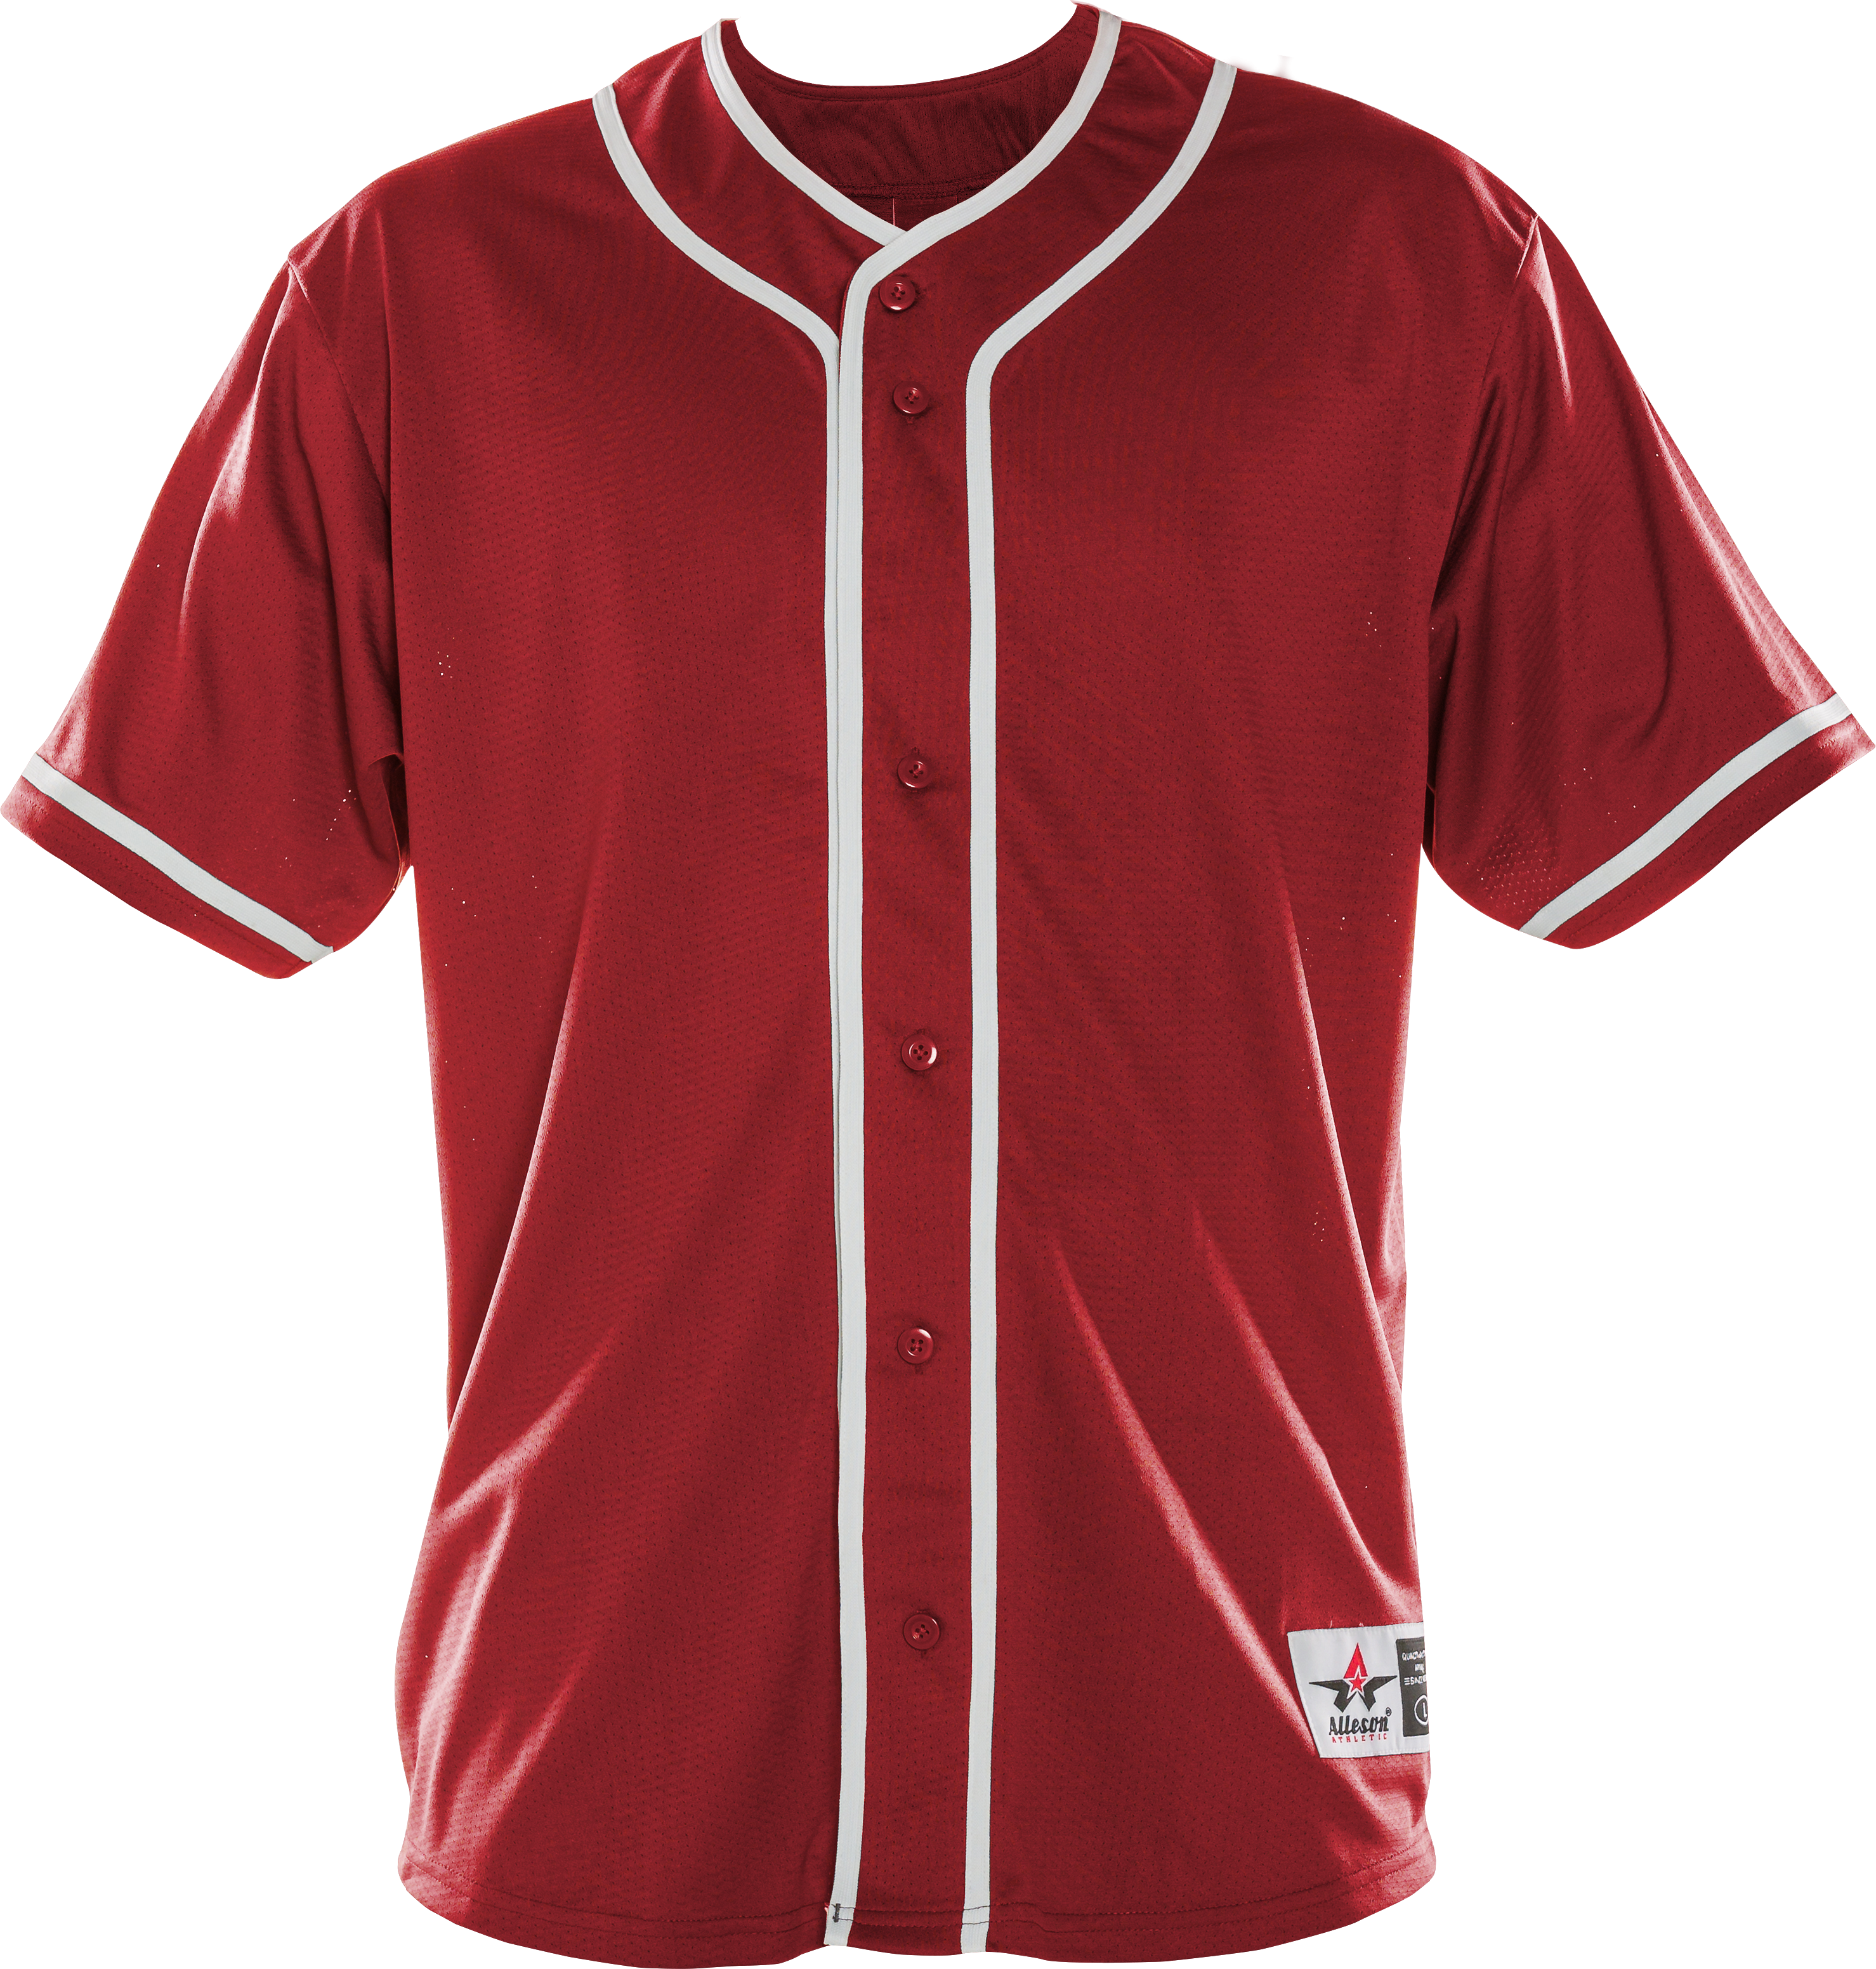 Alleson Athletic Youth Dura Light Mesh Baseball Jersey - S / Grey